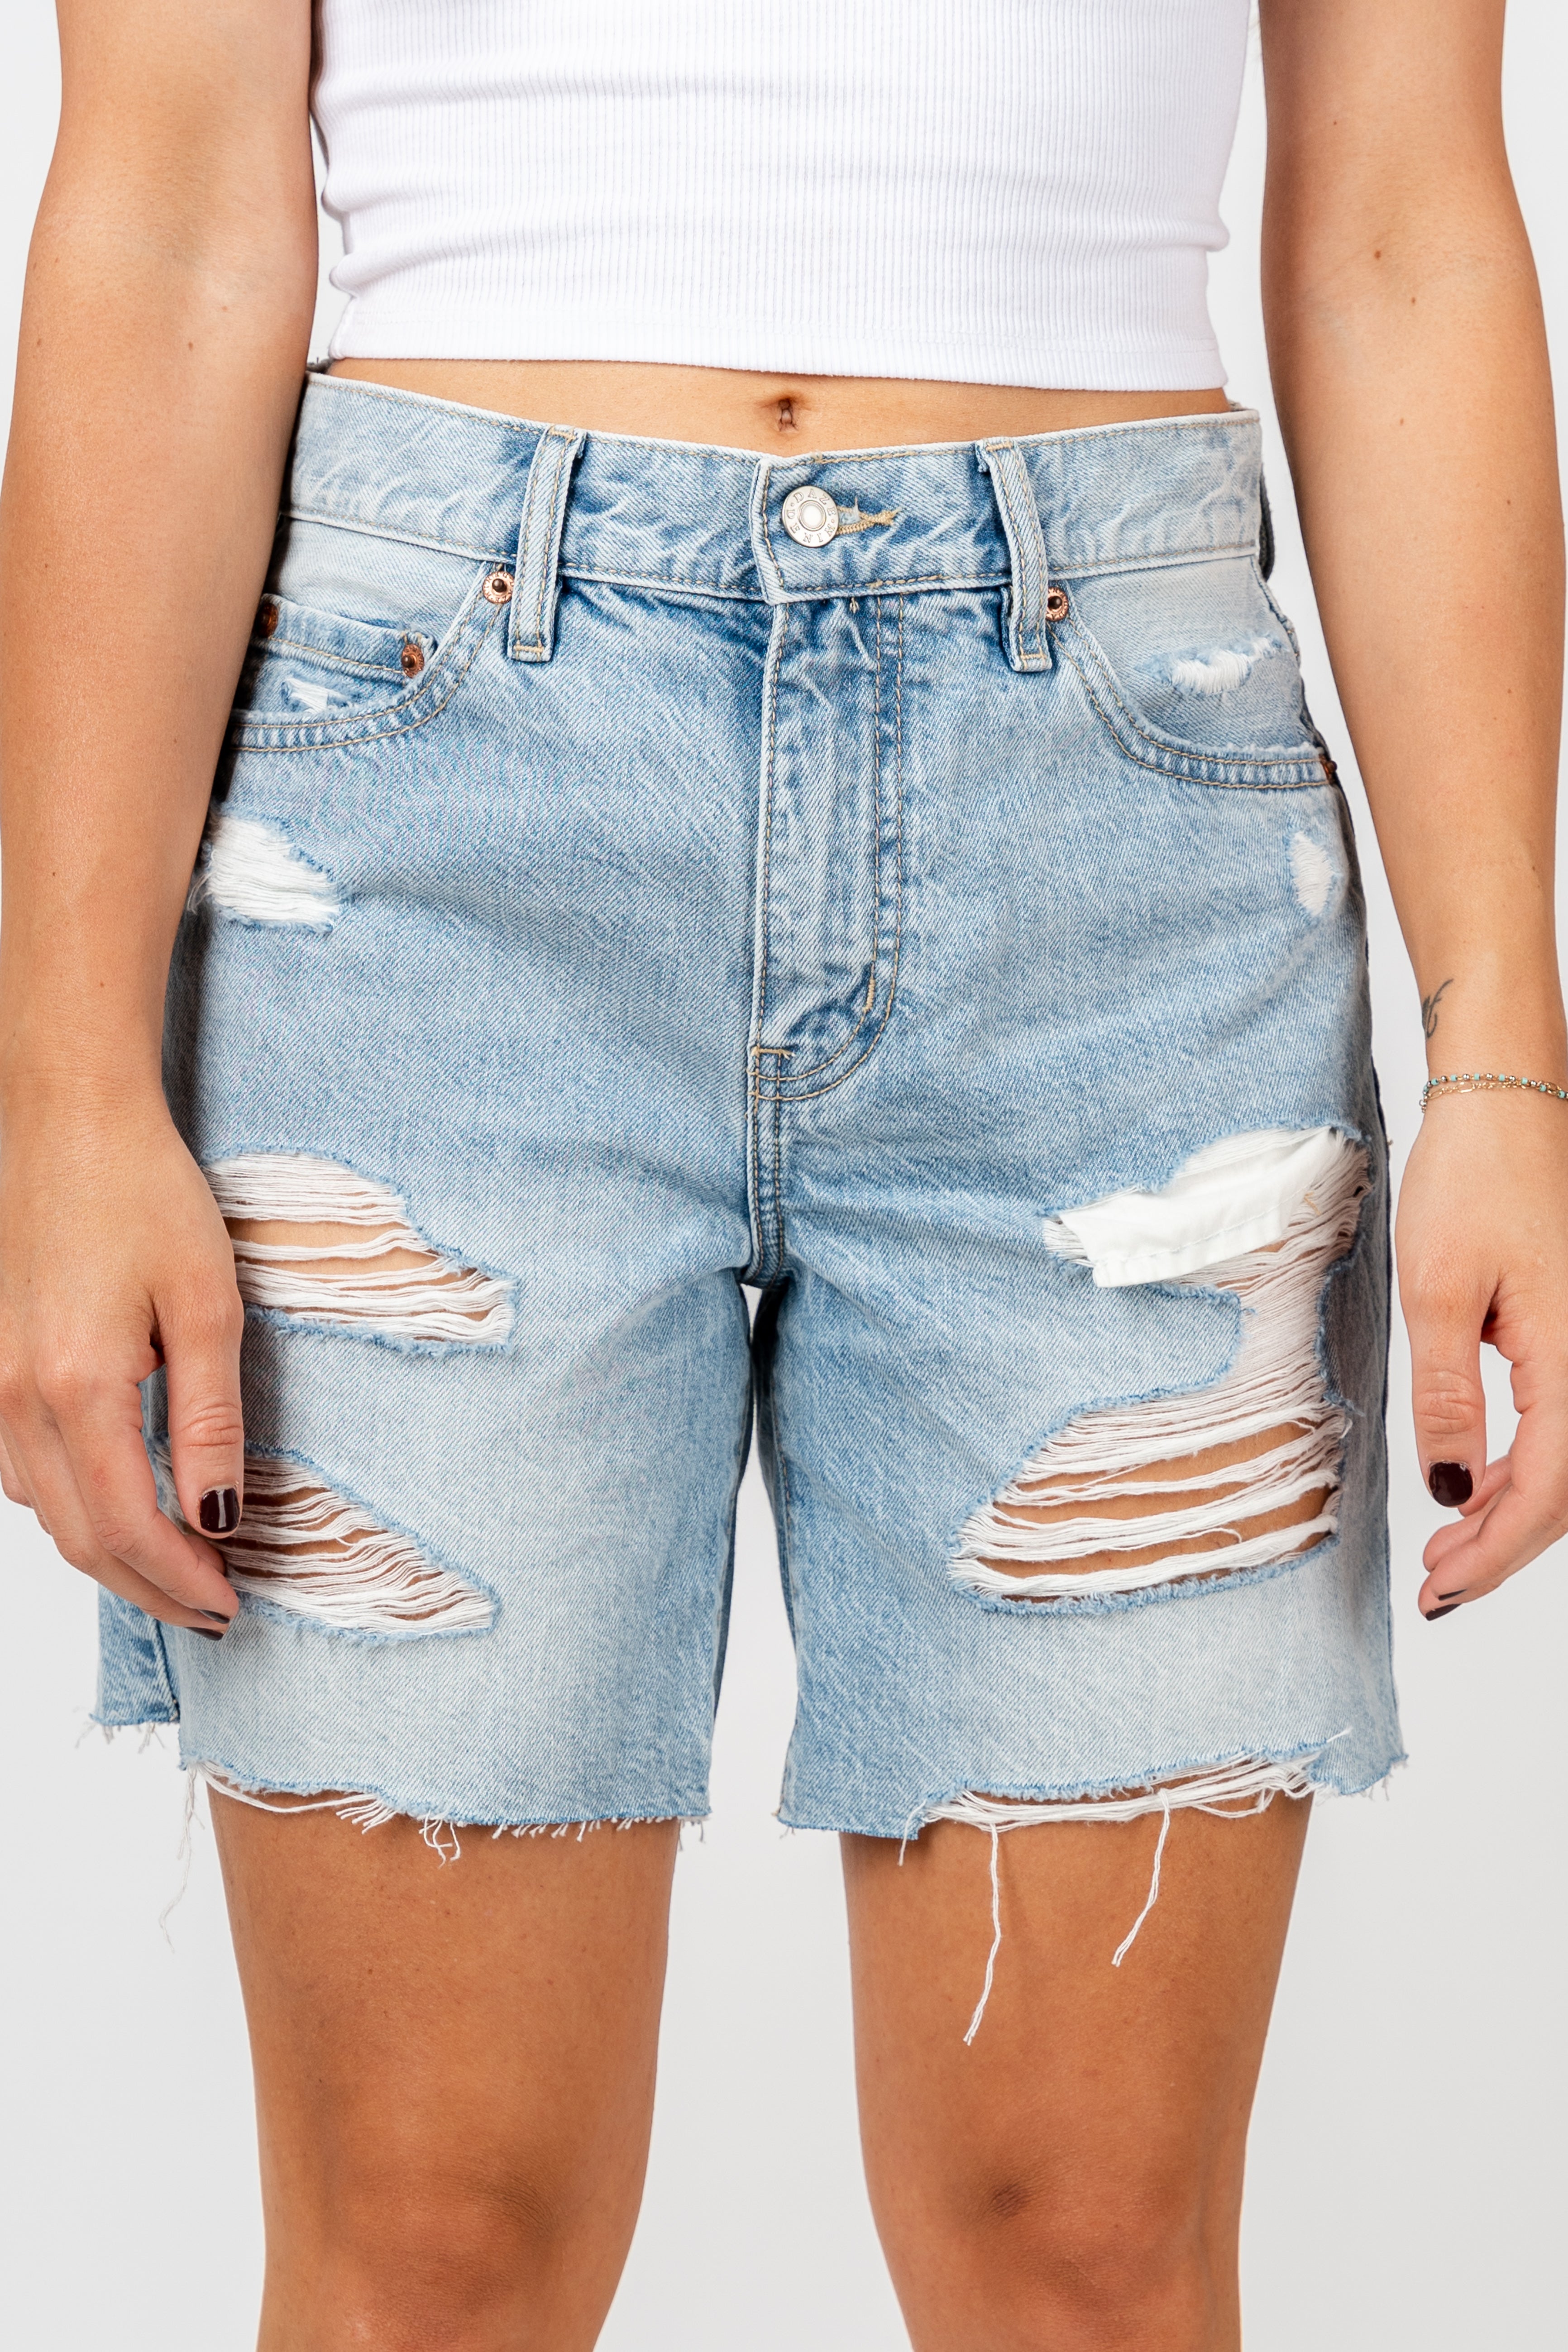 administration conversation East Timor Daze slouch 90's shorts intuition | Trendy Shorts - Lush Fashion Lounge